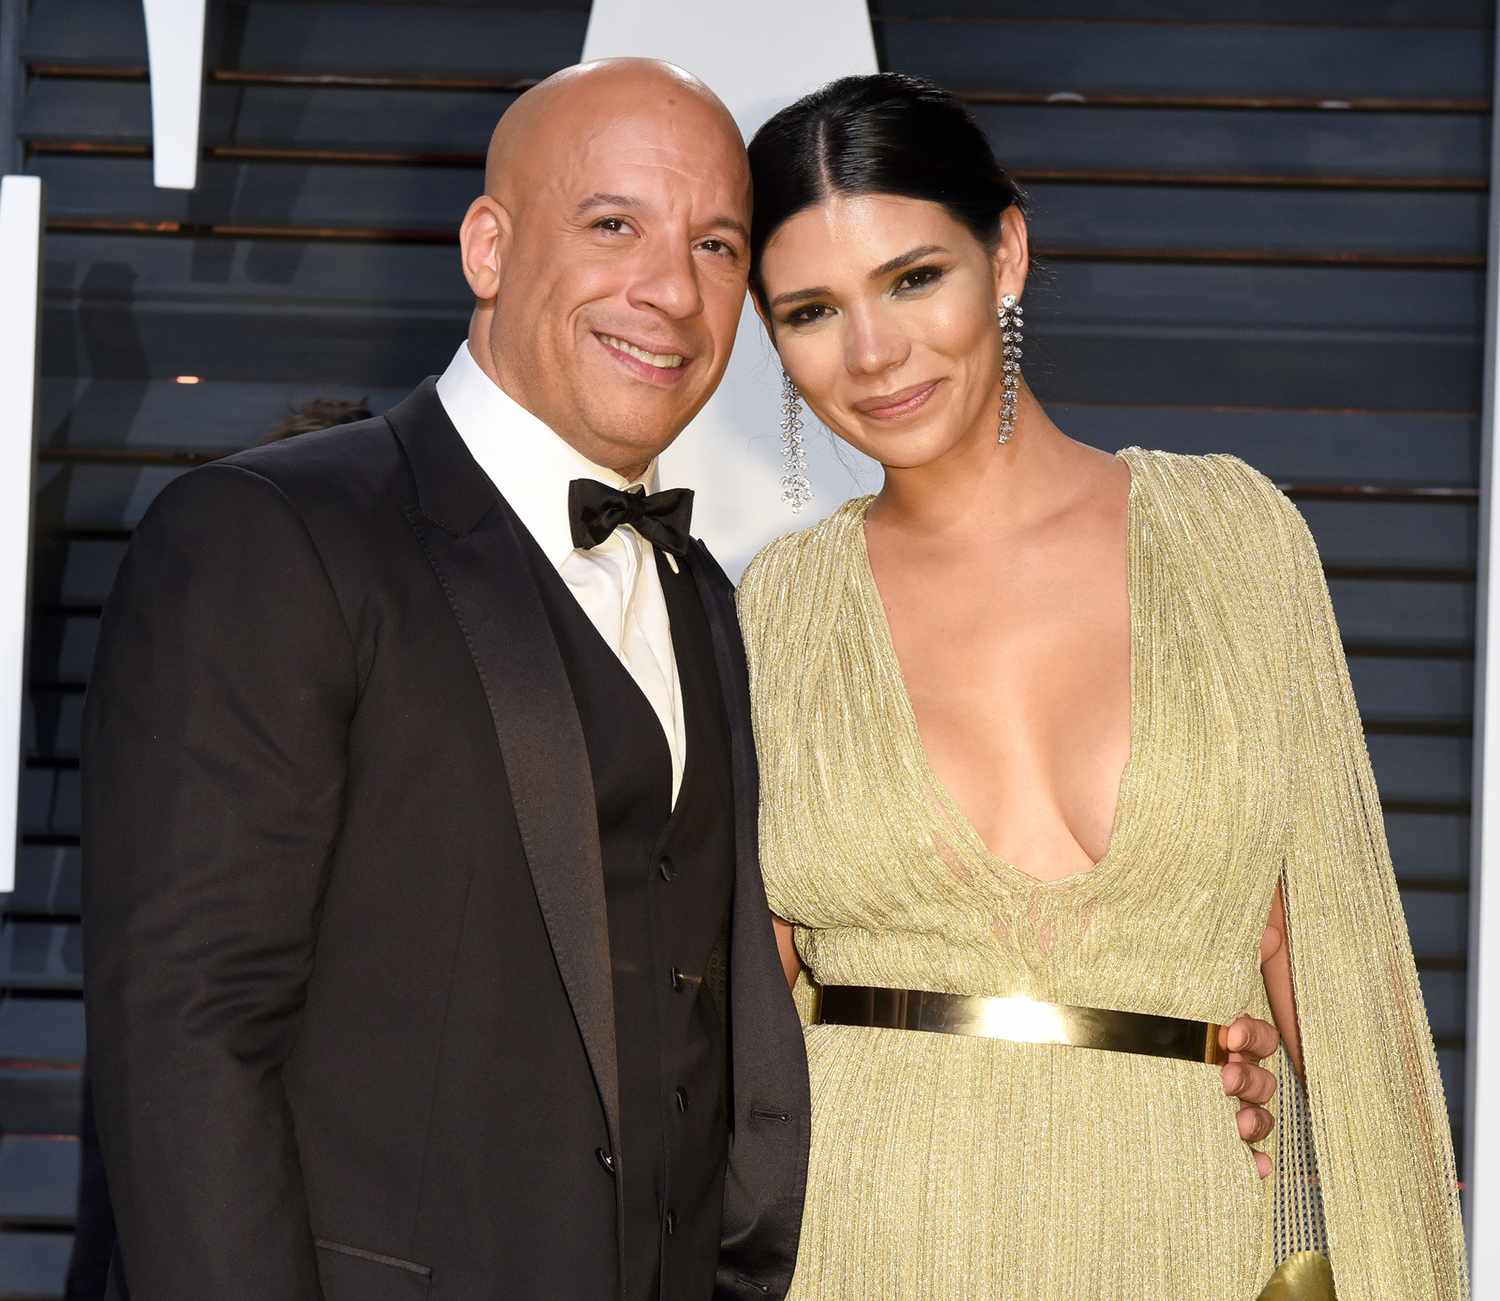 Vin Diesel's Wife Paloma Jimenez Biography: Age, Children, Movies, Spouse, Net Worth, Height, Siblings, Parents